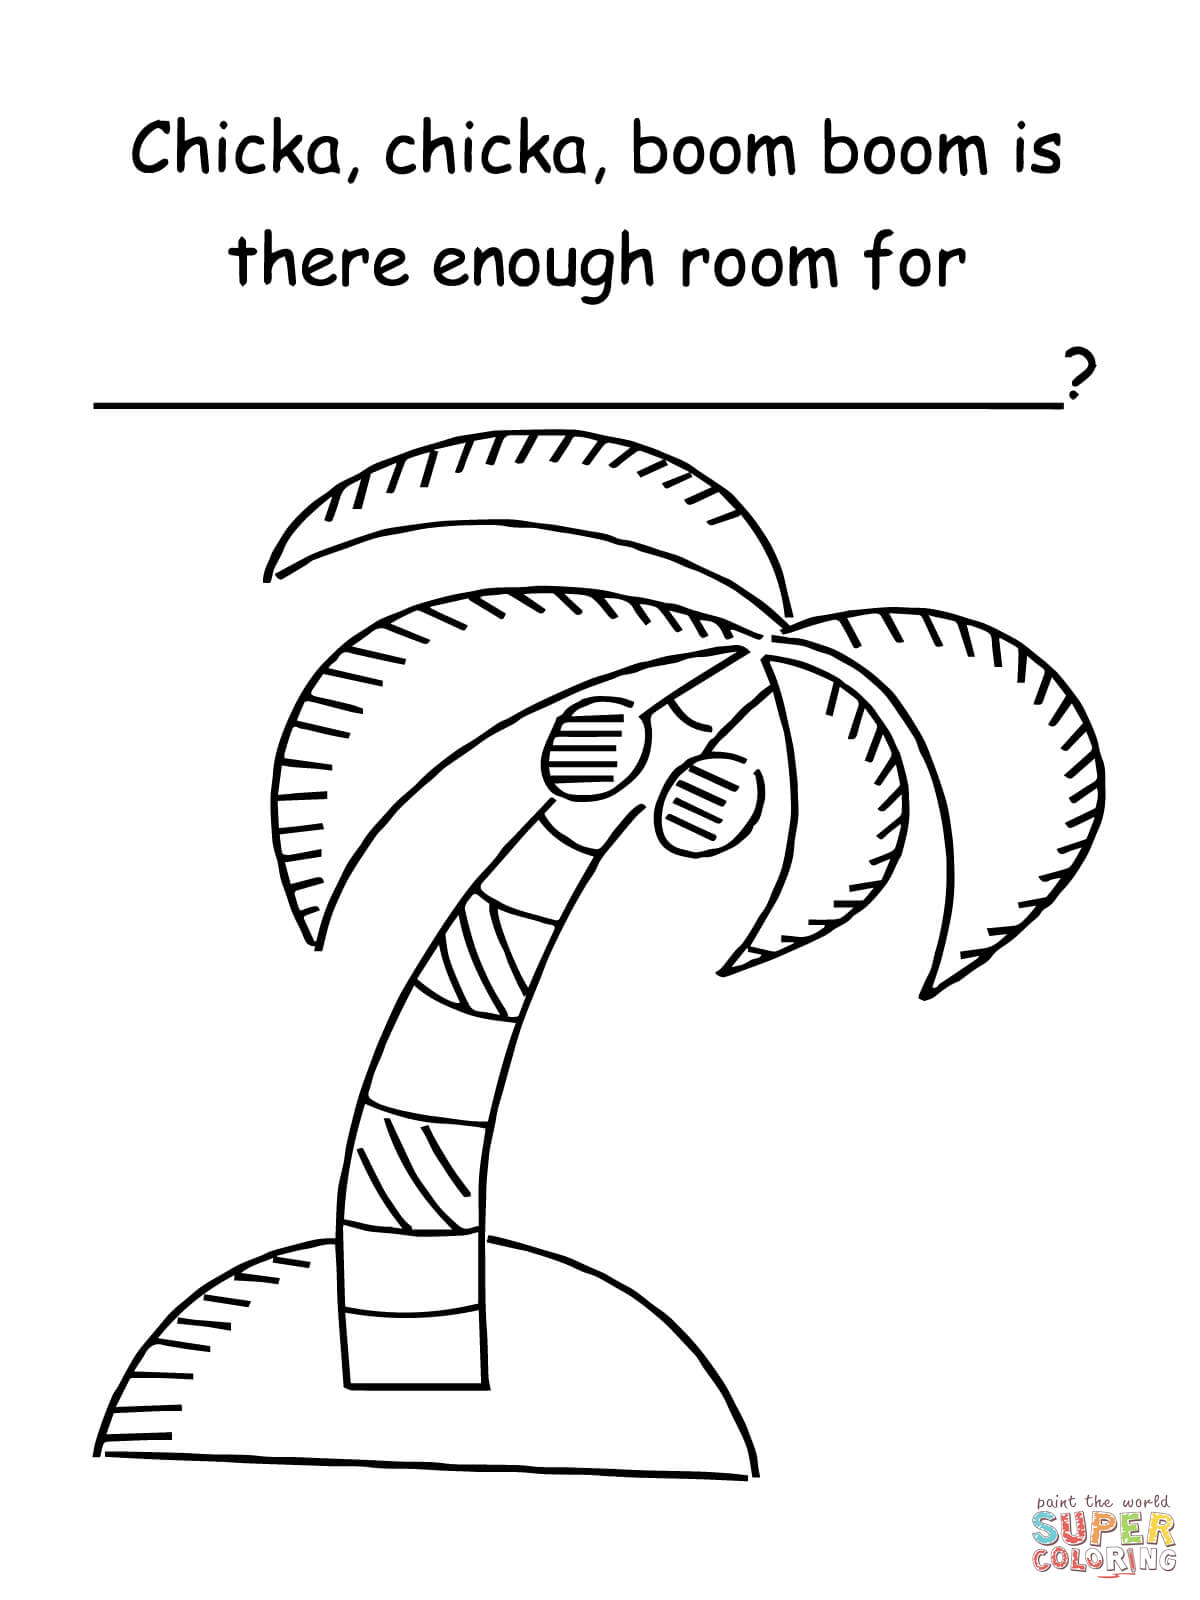 Chicka chicka boom boom is there enough room for coloring page free printable coloring pages